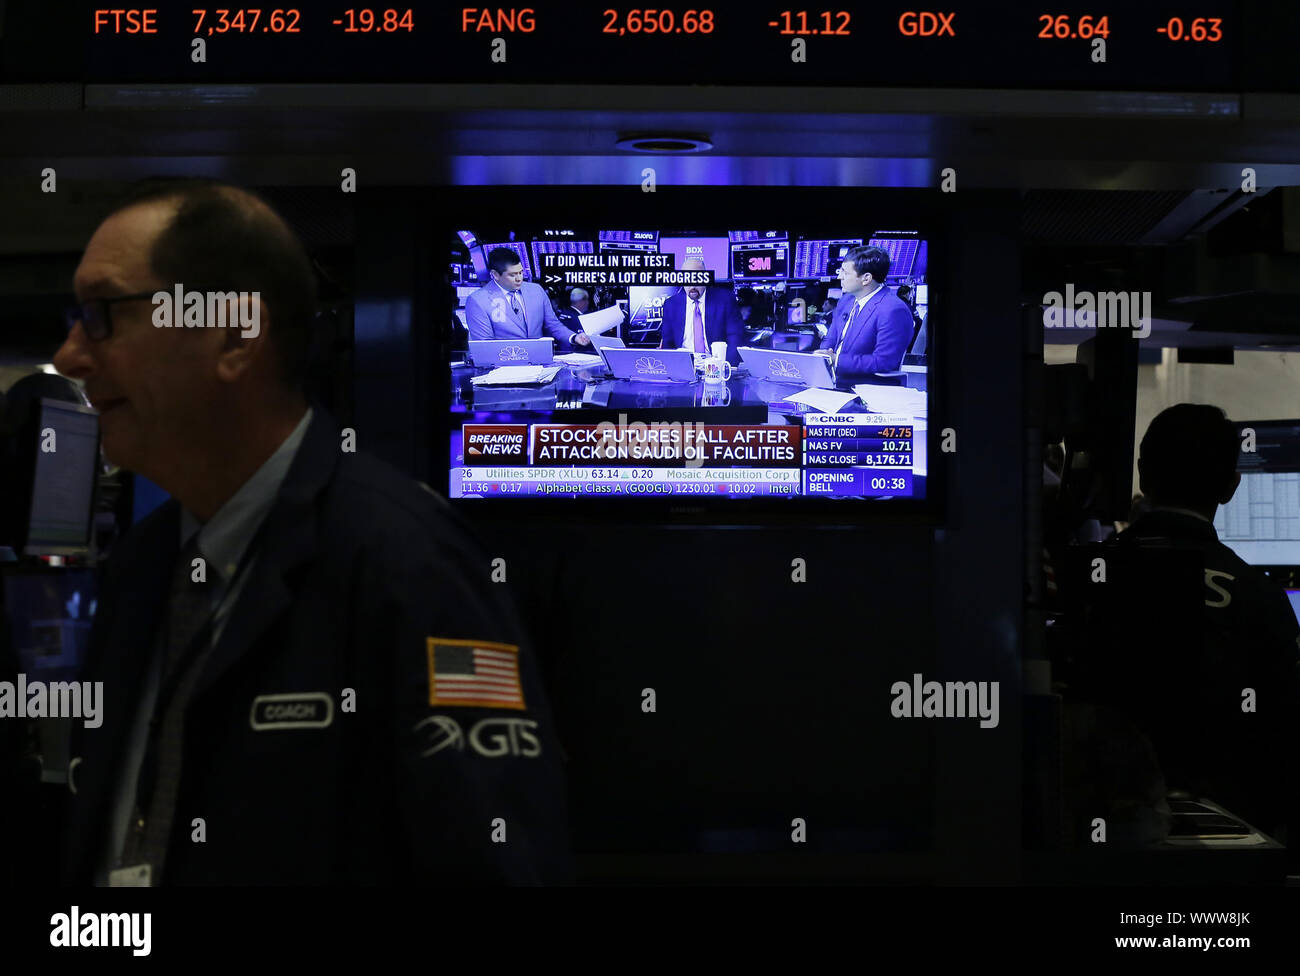 New York, USA. 16th Sep, 2019. Brent Crude Oil is up over $6.00 at $66.30 before the opening bell on the the floor of the New York Stock Exchange on Wall Street in New York City on Monday, September 16, 2019. Credit: UPI/Alamy Live News Stock Photo